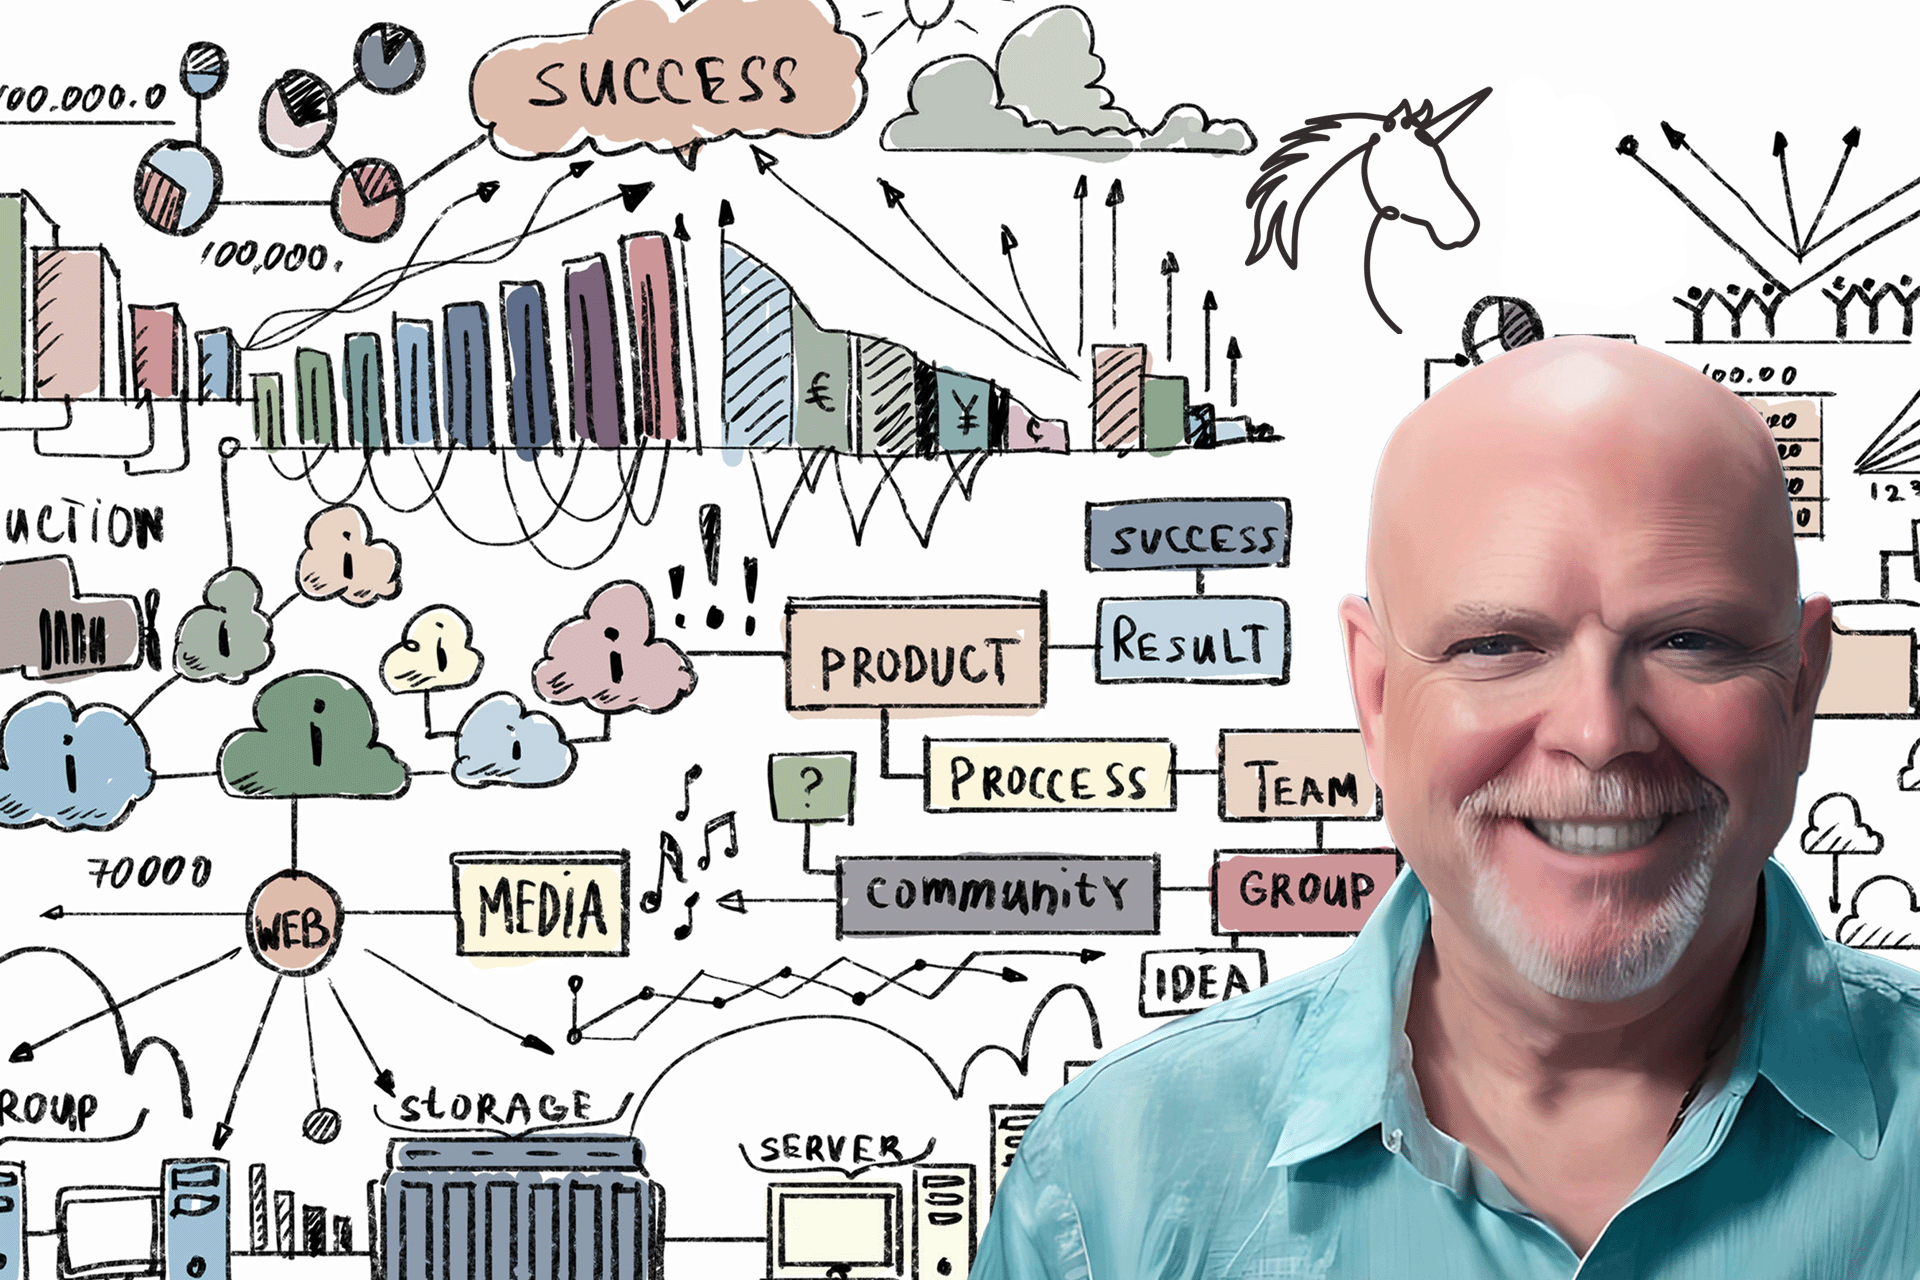 Illustration of dan wenk in front of whiteboard with marketing and web doodles